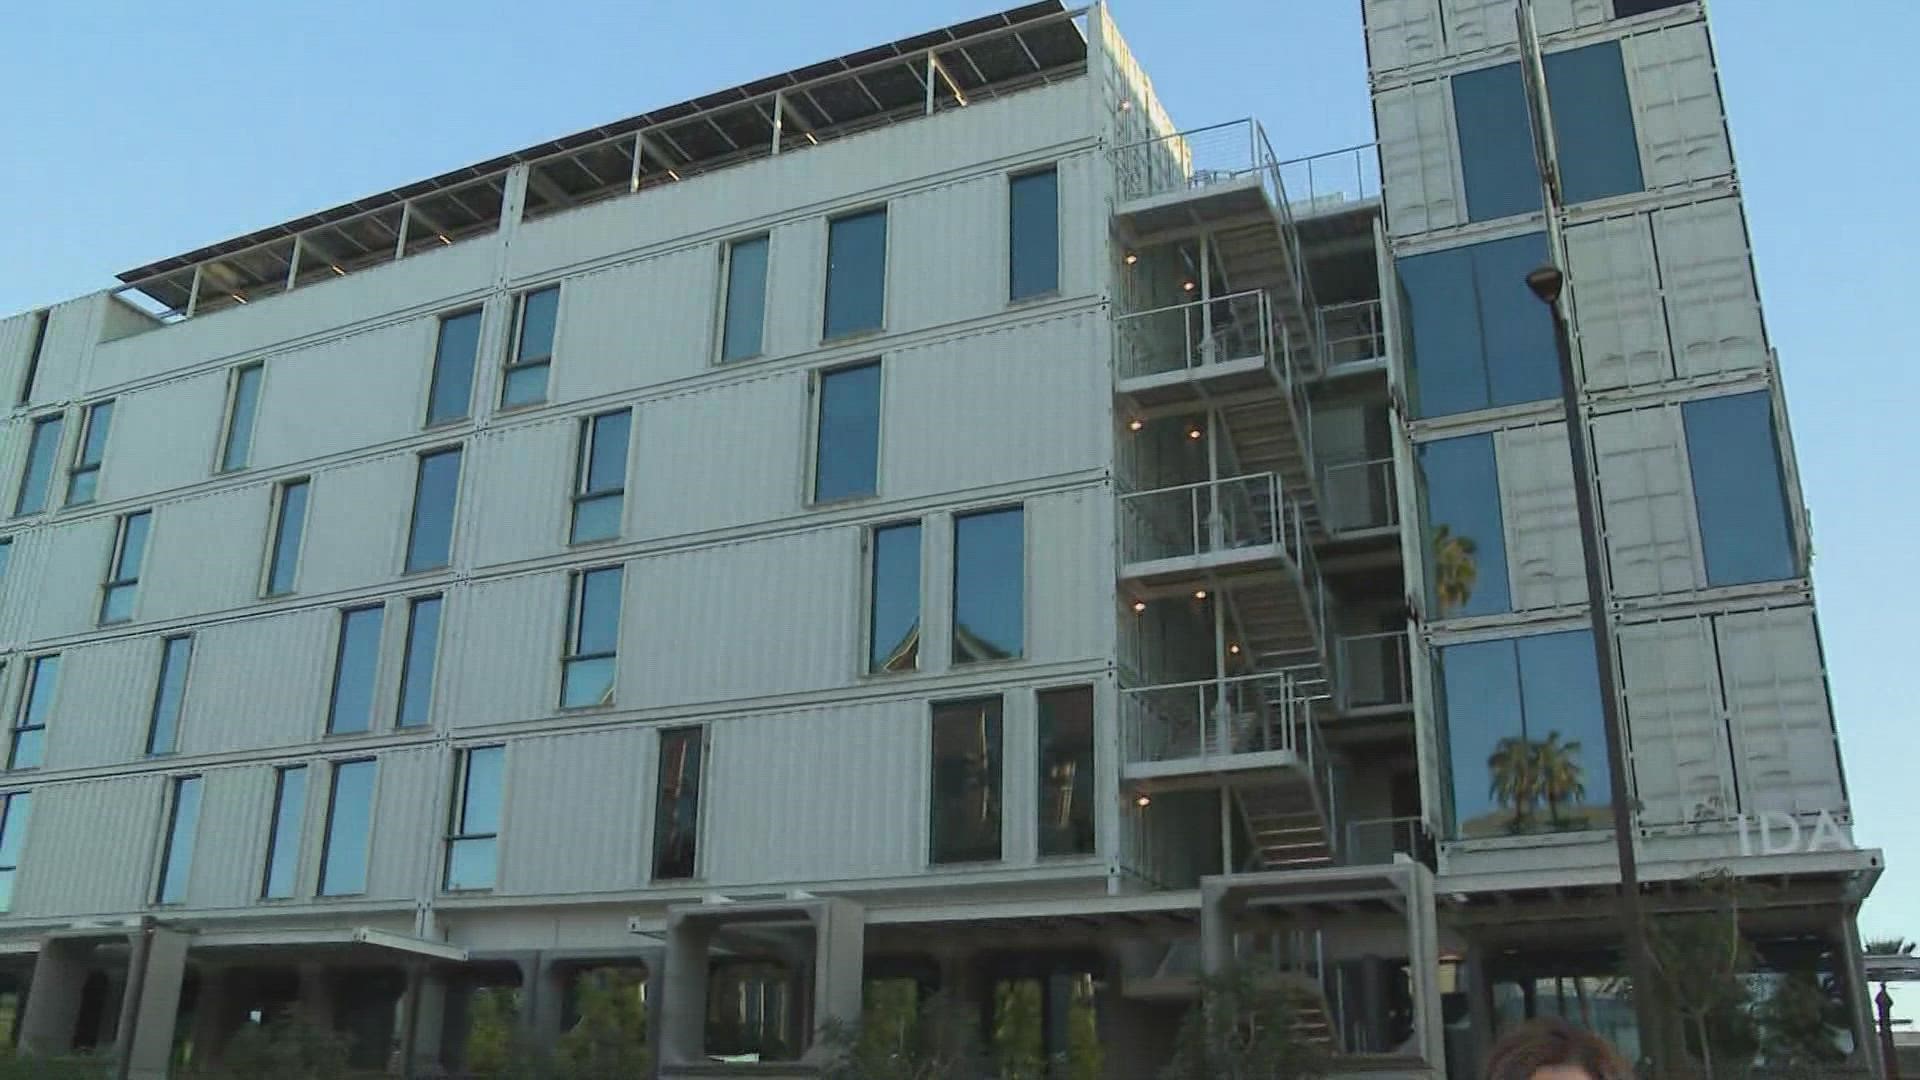 A new housing complex made out of shipping containers is open for business in downtown Phoenix. Jen Wahl has more on this story.